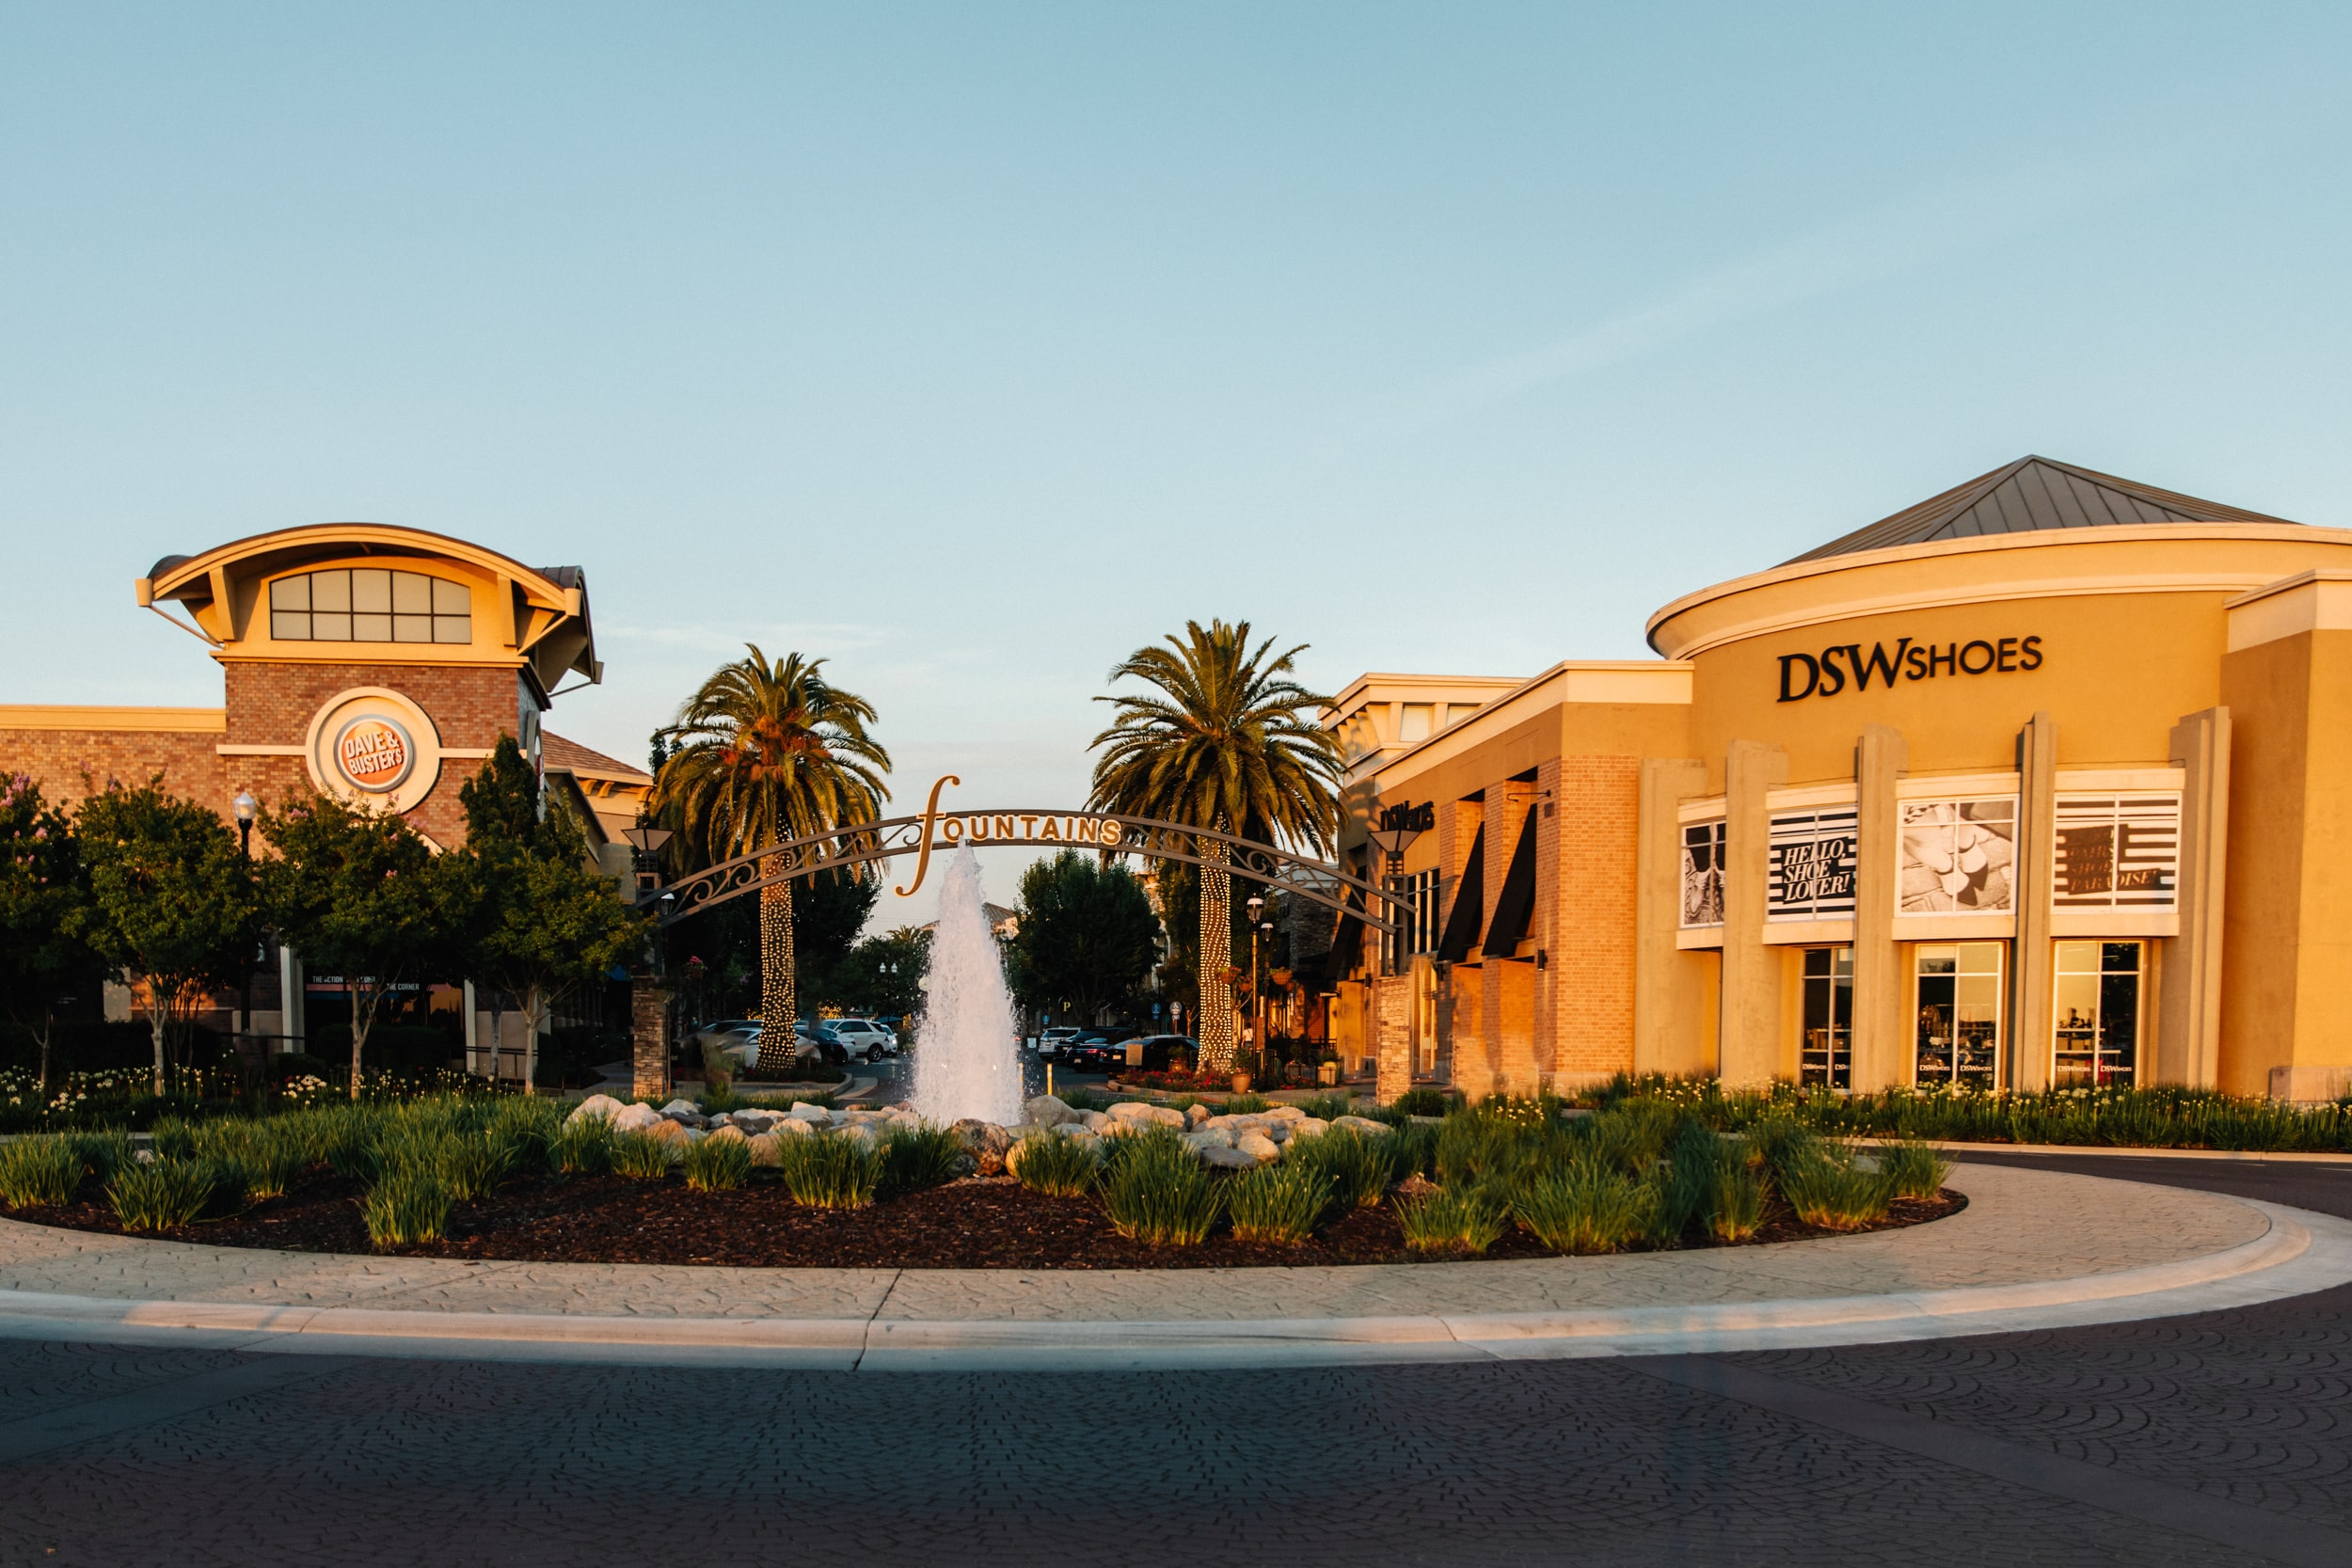 Photo of the Fountains at Roseville main roundabout, showing the main fountain, along with the Fountains at Roseville signage, DSW Shoes, and Dave & Buster.